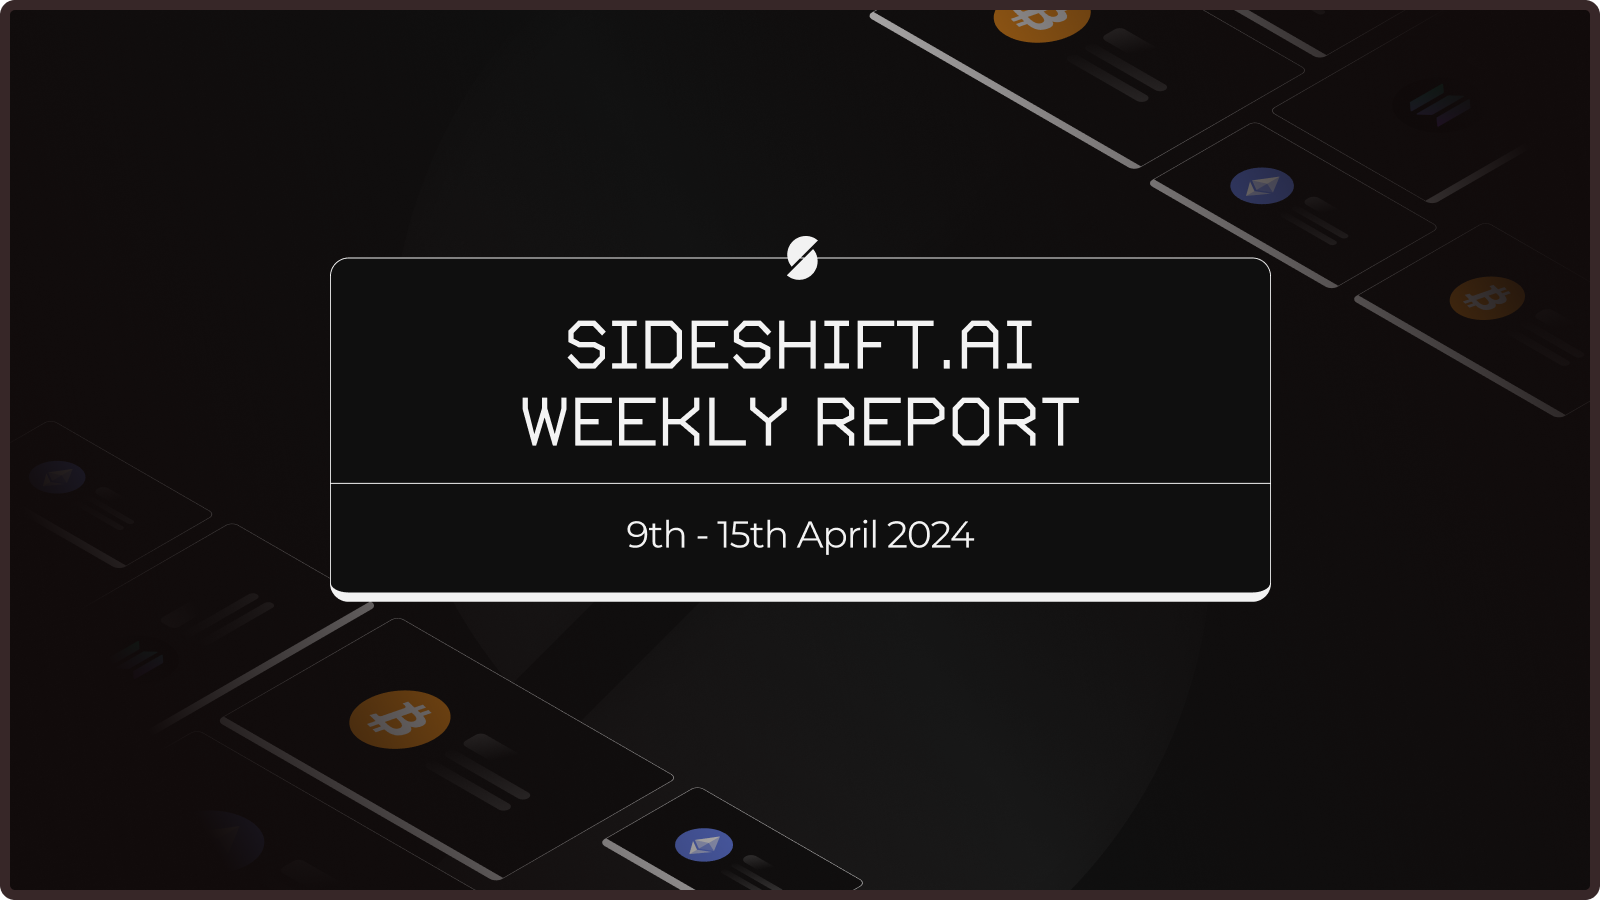 SideShift.ai Weekly Report | 9th - 15th April 2024